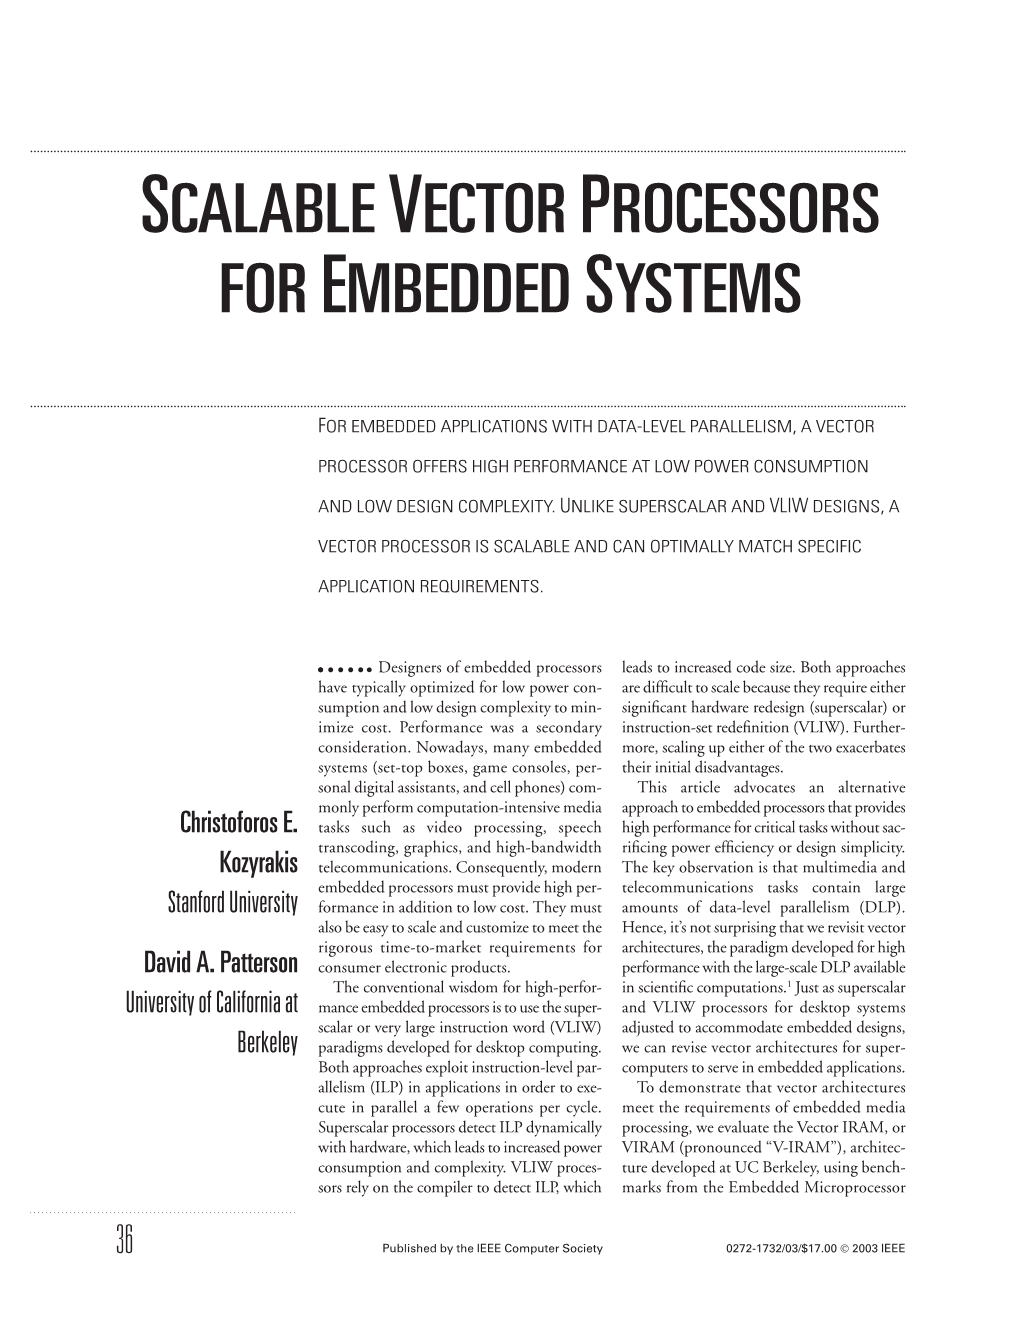 Scalable Vector Processors for Embedded Systems